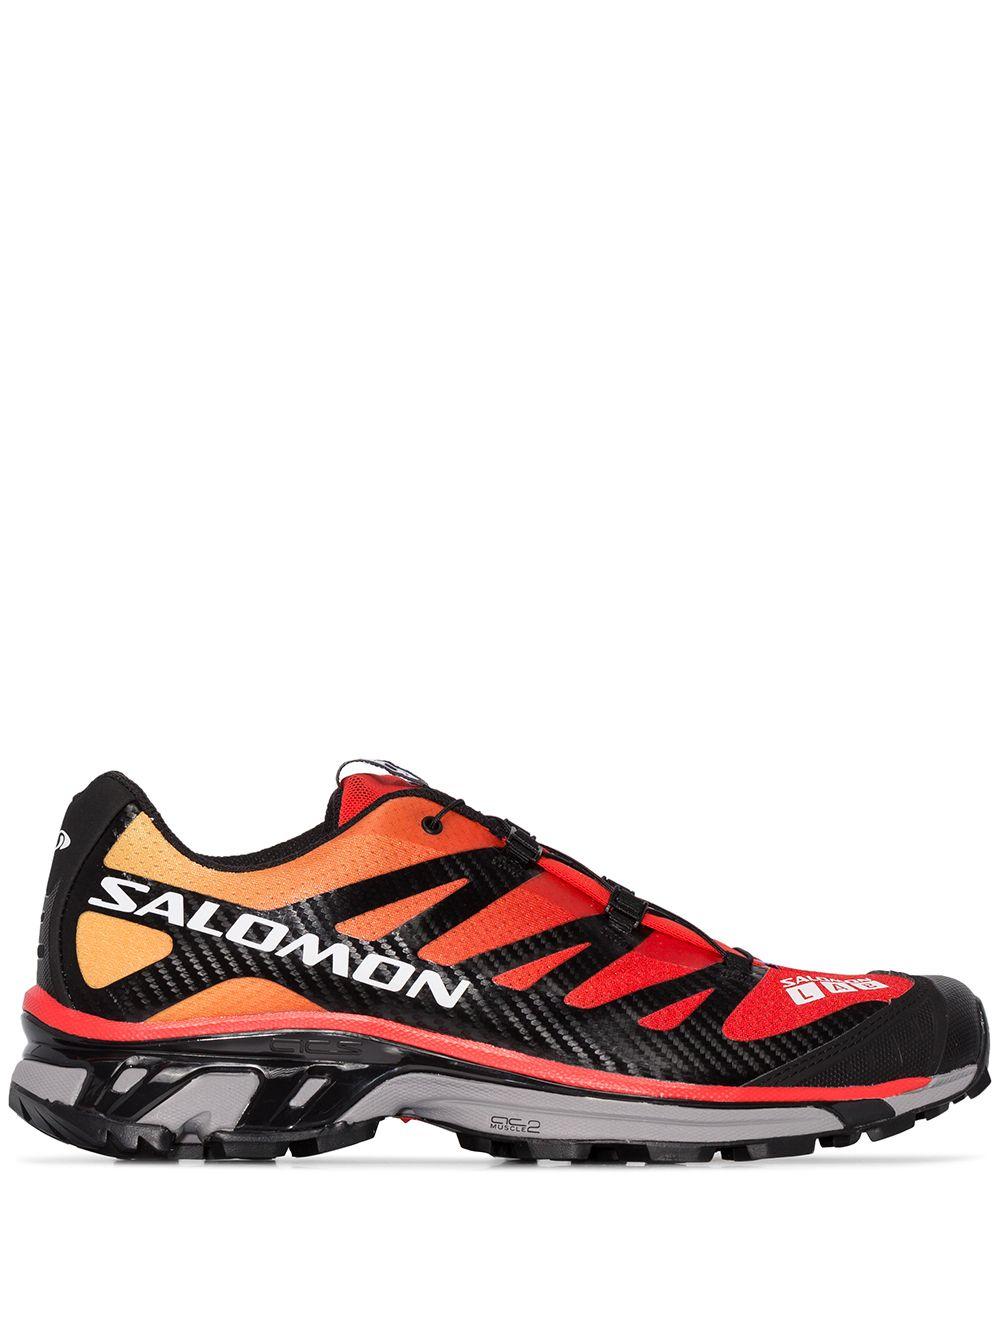 Salomon S/LAB Xt4 Adv Low Top Sneakers in Red for Men - Lyst